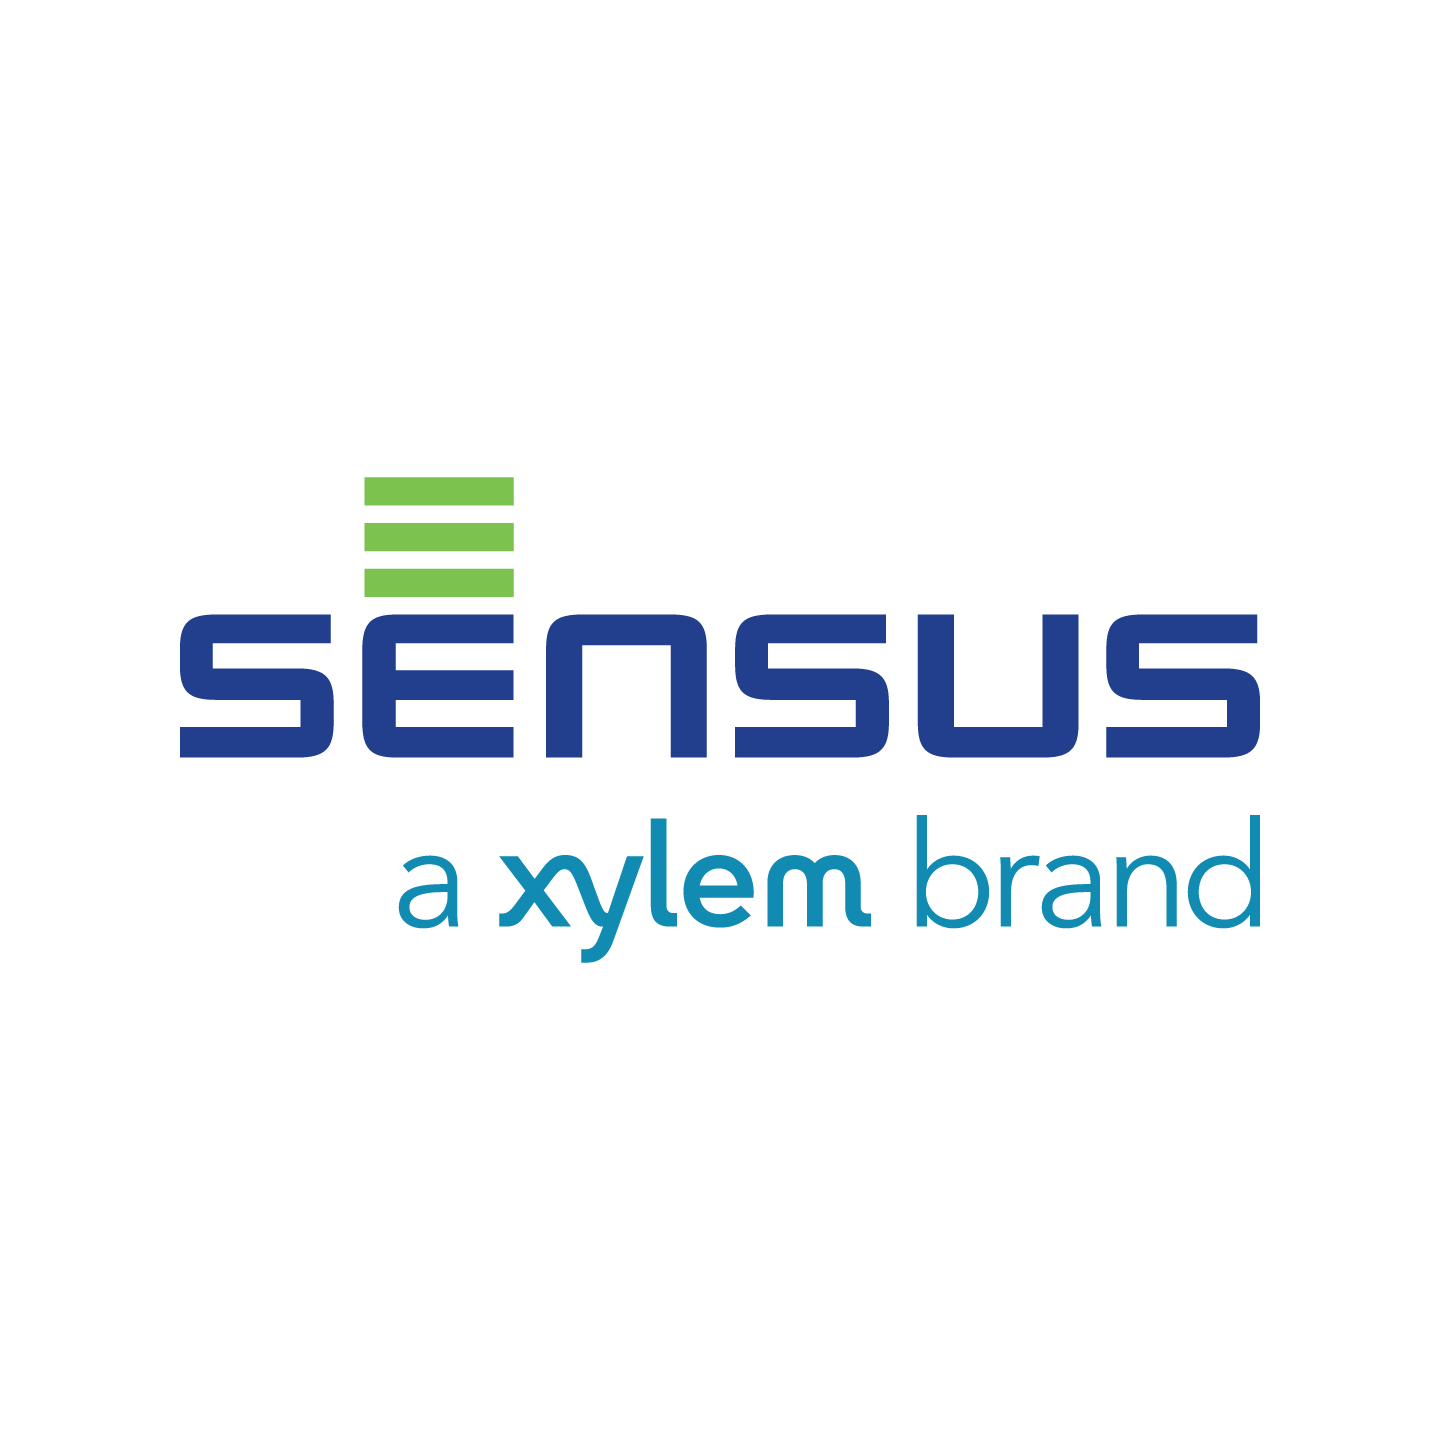 Logo of Sensus, a xylem brand, written in shades of blue with three green horizontal lines above the "e" in Sensus